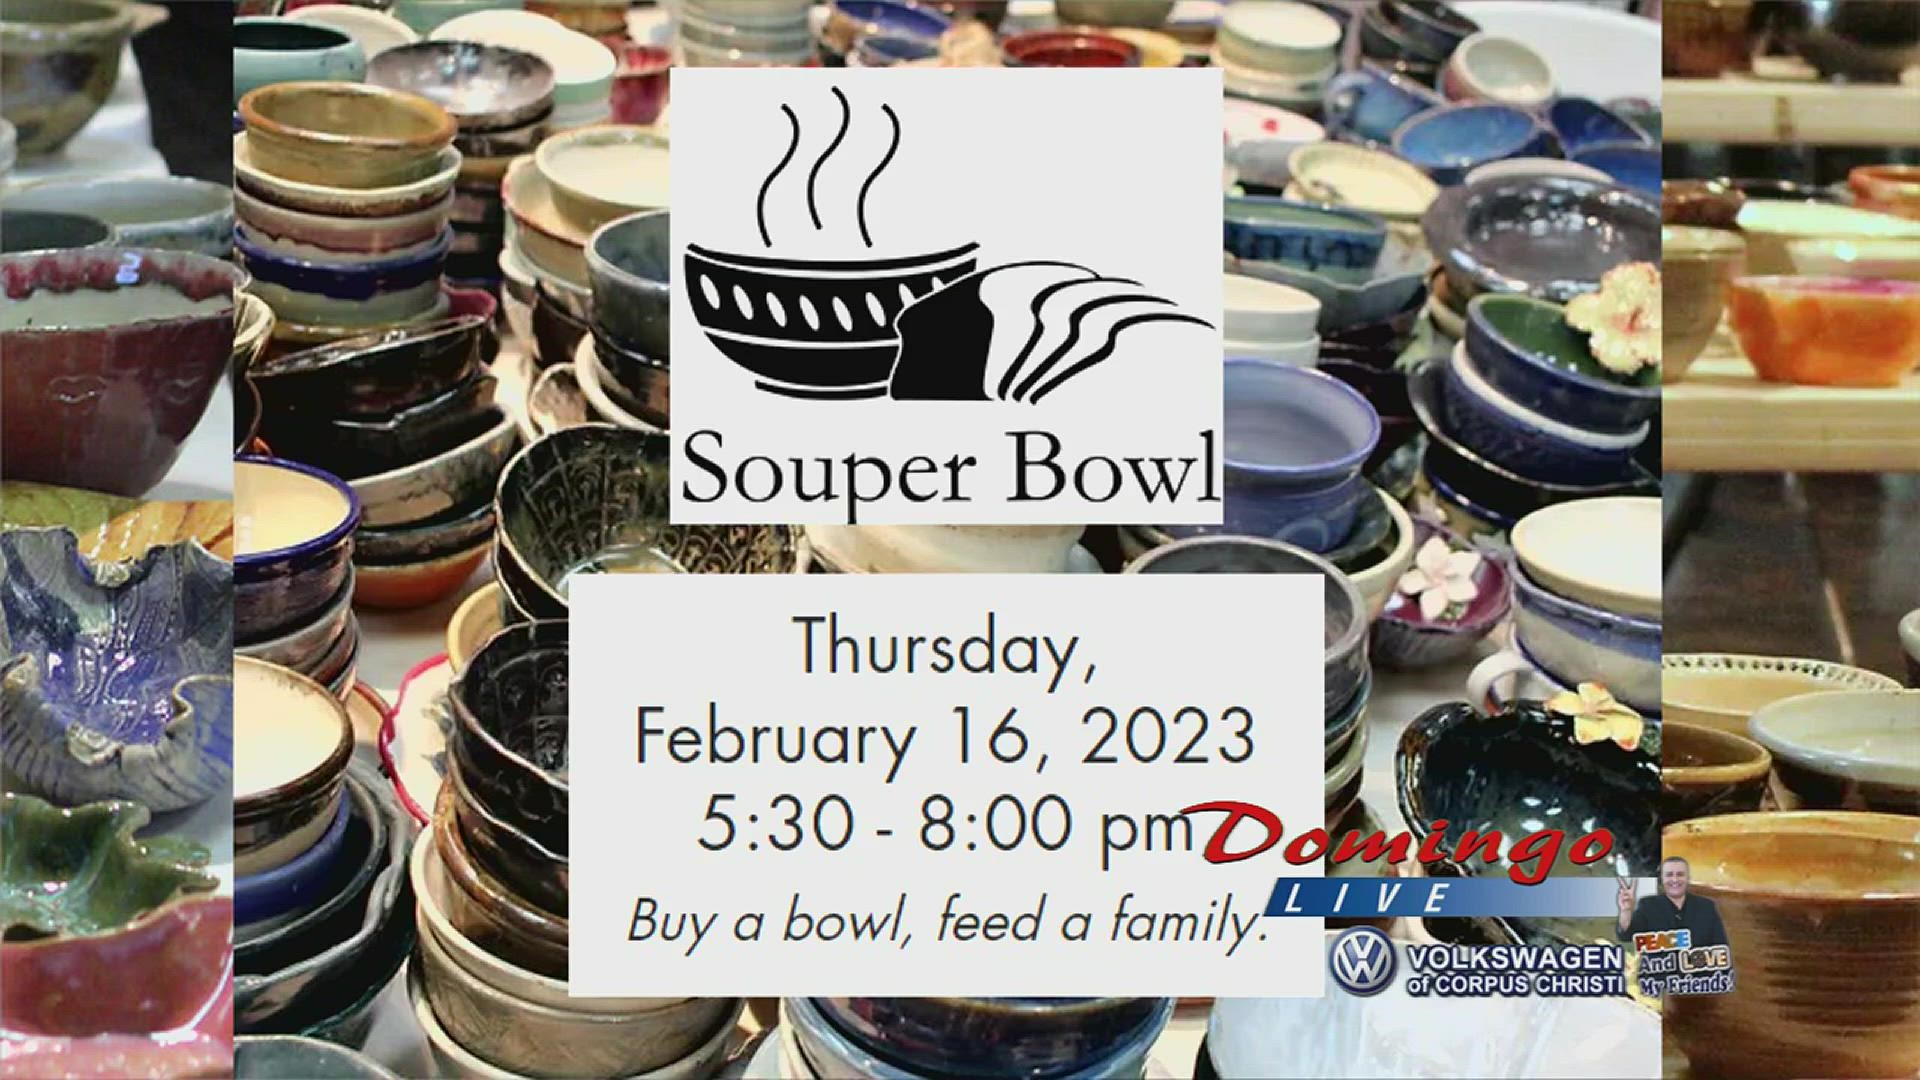 Art Center Executive Director Dianna Bluntzer Sherman joined us live to dish out the details of the 2023 Souper Bowl, which is back for the first time since COVID.